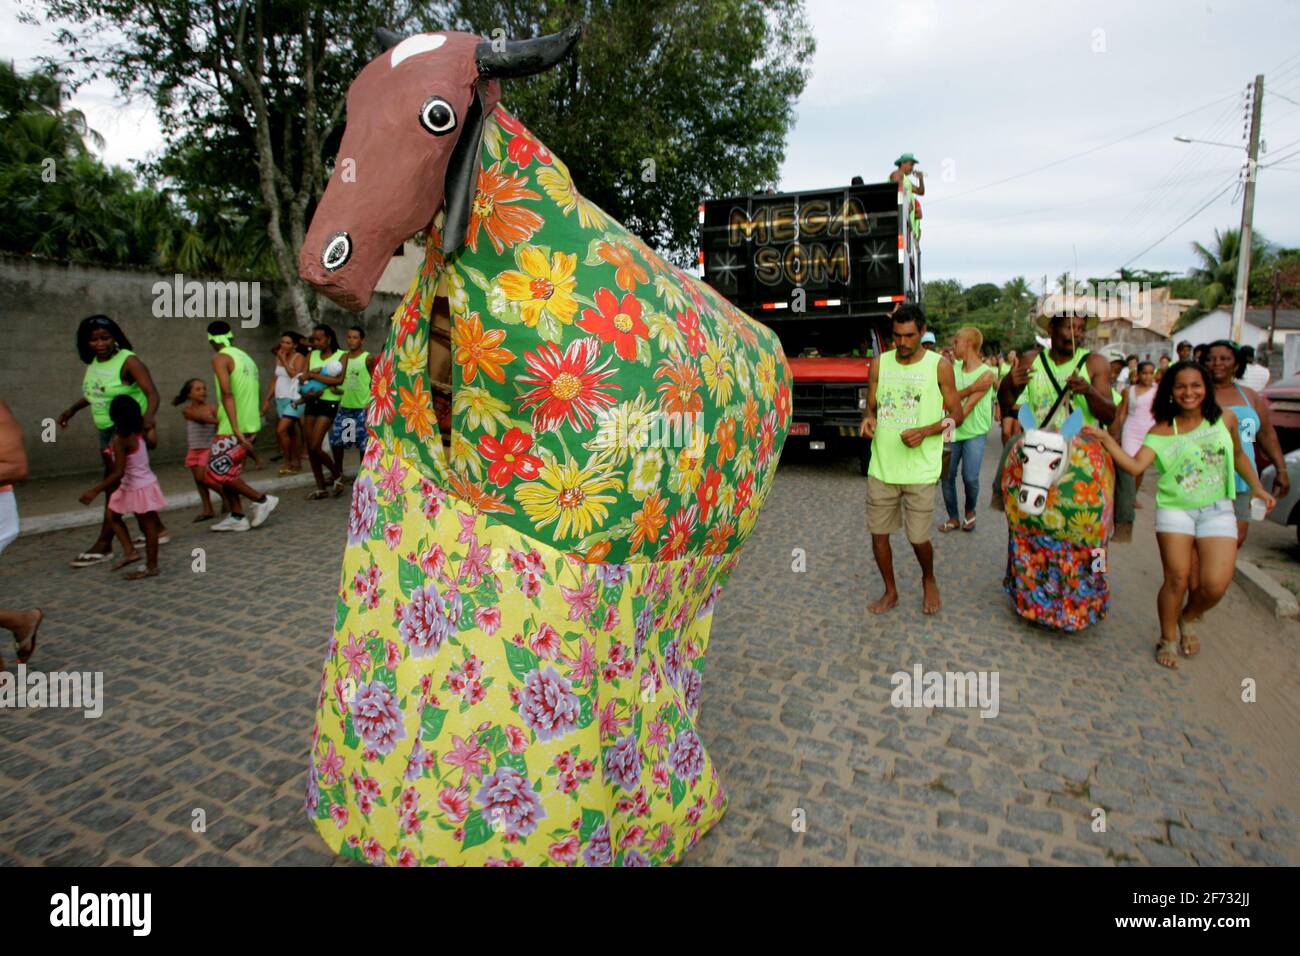 caravelas, bahia / brazil - march 5, 2011: members of the carnival block 'Burrinha' are seen in the Ponta de Areia district in the city of Caravelas. Stock Photo